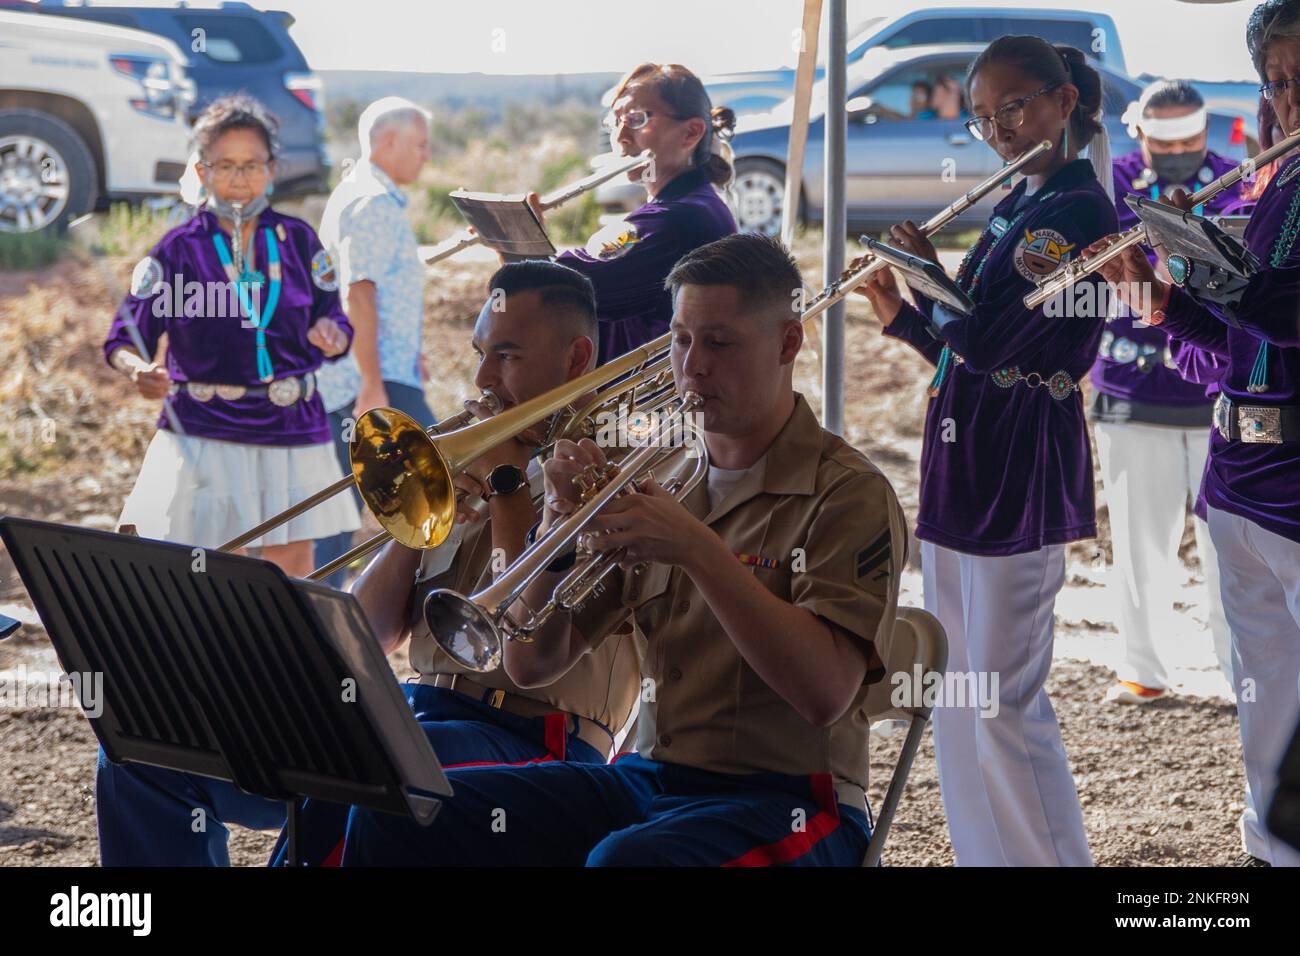 The Marine Forces Reserve Band performs alongside the Navajo Nation Band during the 80th anniversary of the founding of the Navajo Code Talkers at Tse Bonito, N.M., Aug. 14, 2022. The Marine Corps is supporting the 80th anniversary of the  founding of the Navajo Code Talkers and the vital role they played in the Pacific Island Hopping Campaign of World War II. Stock Photo